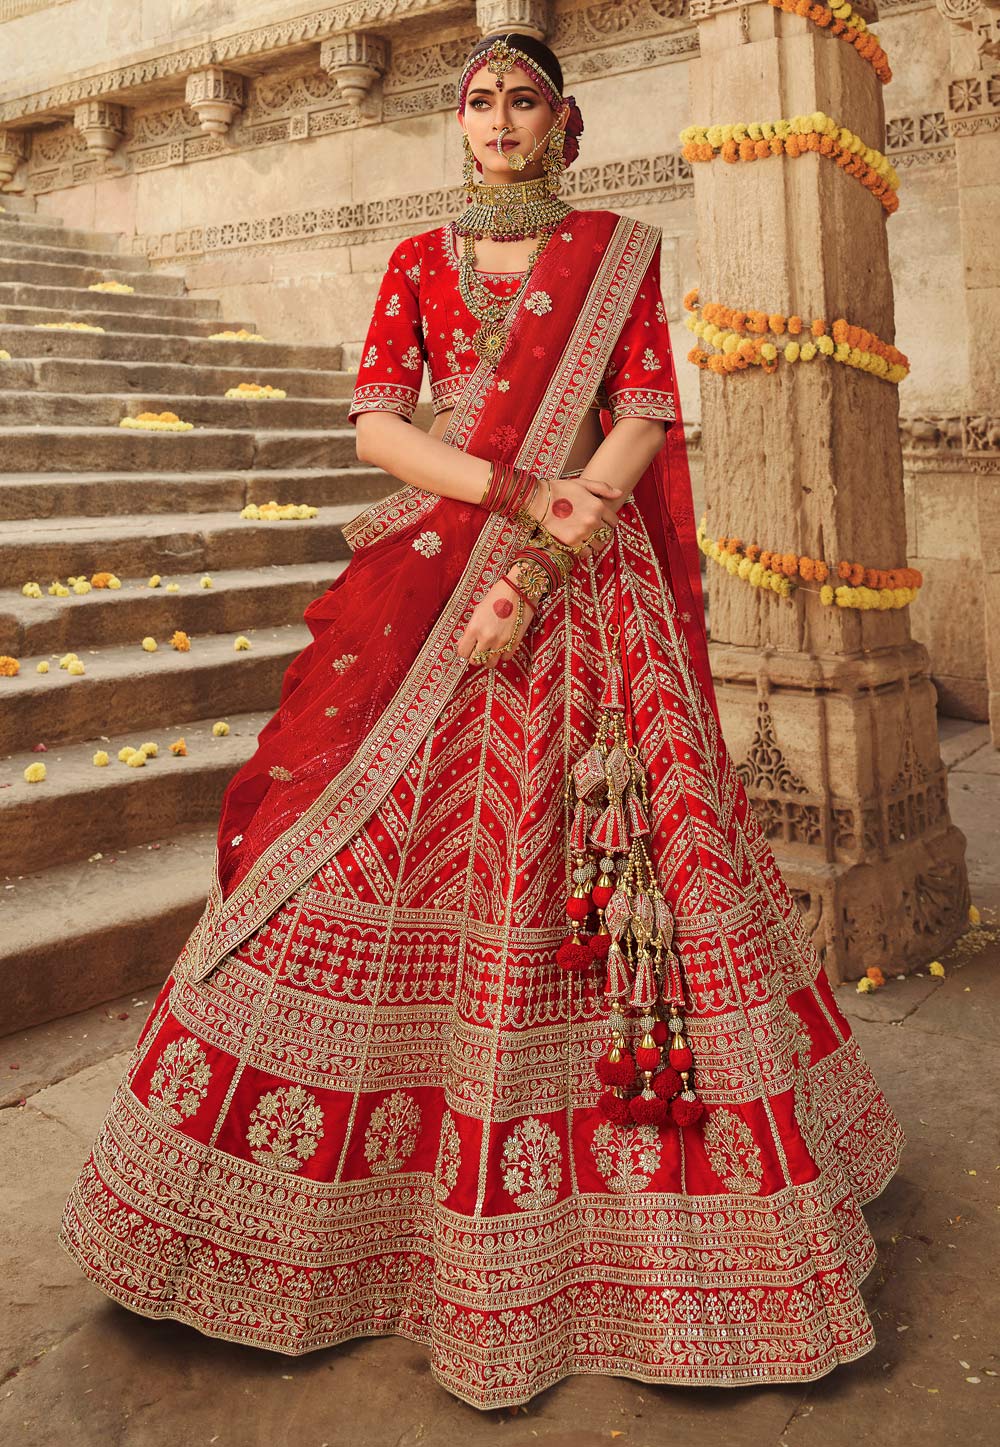 WWI Edit of Top Red Bridal Lehengas for 2023 | Indian bridal wear red,  Indian bridal dress, Bridal lehenga red